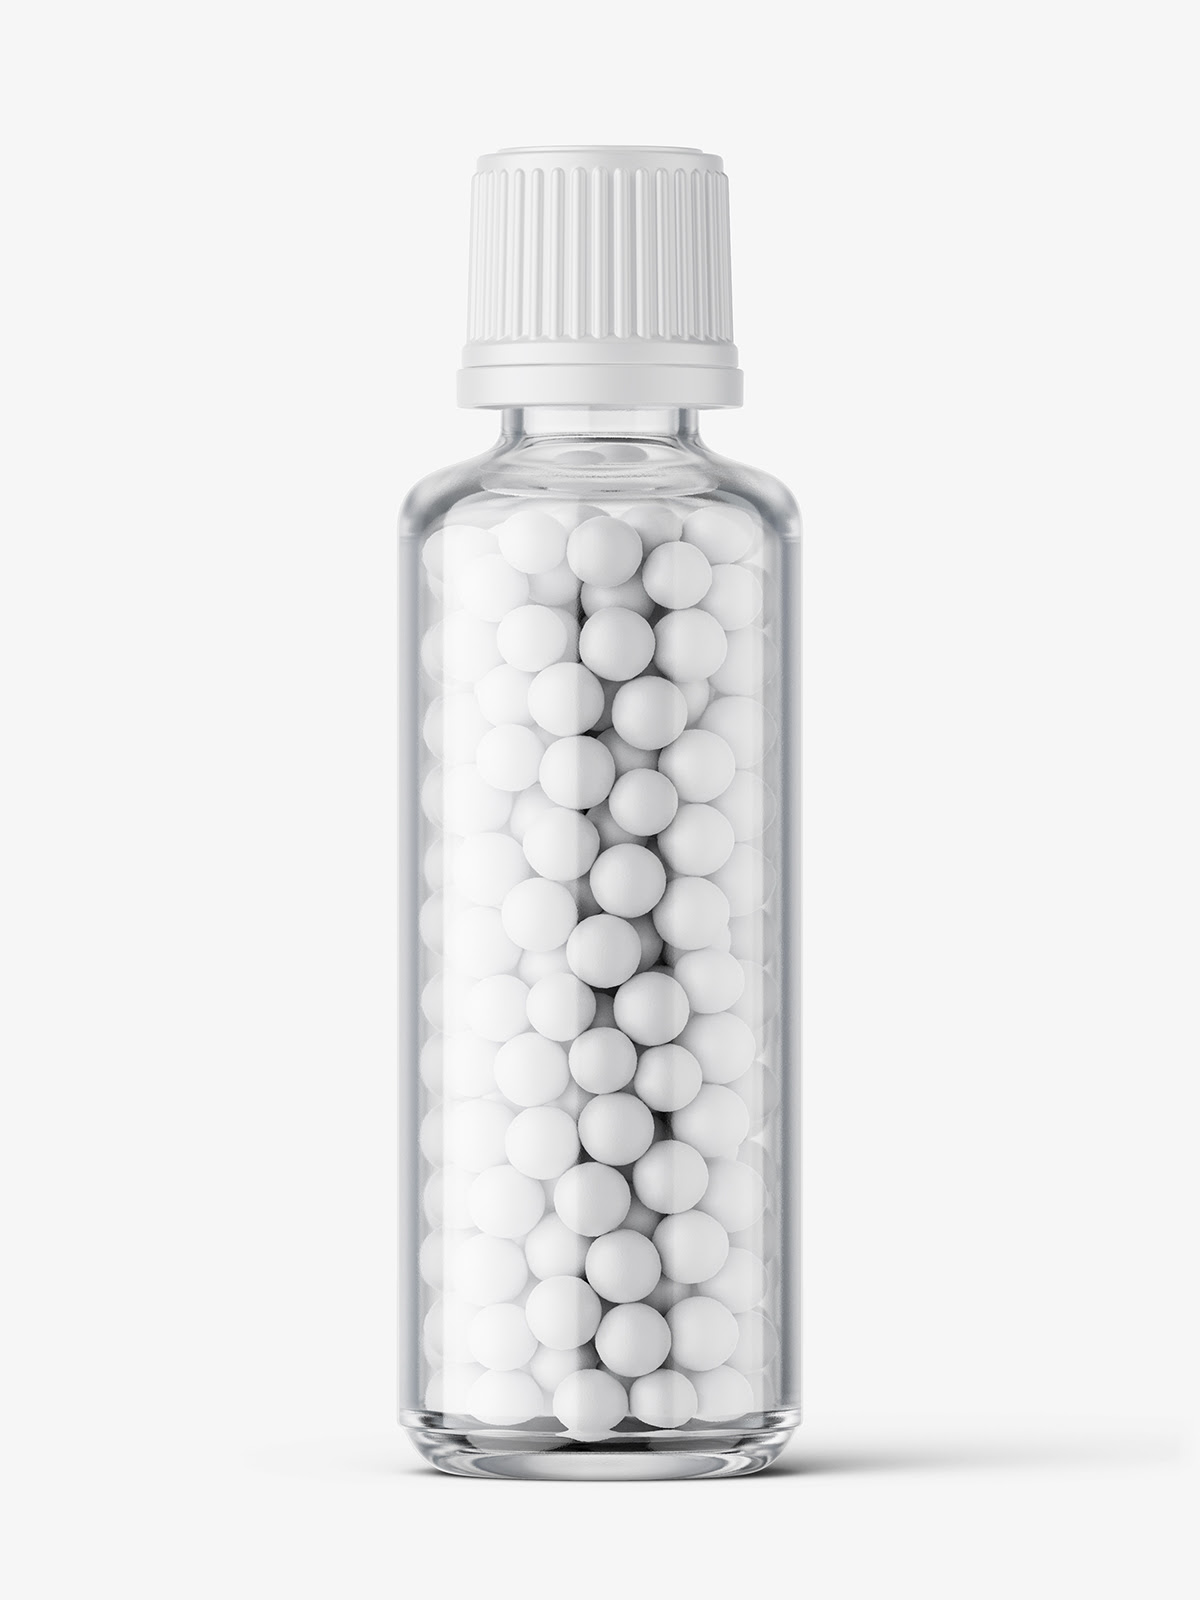 Clear bottle with pills mockup / 50 ml Smarty Mockups